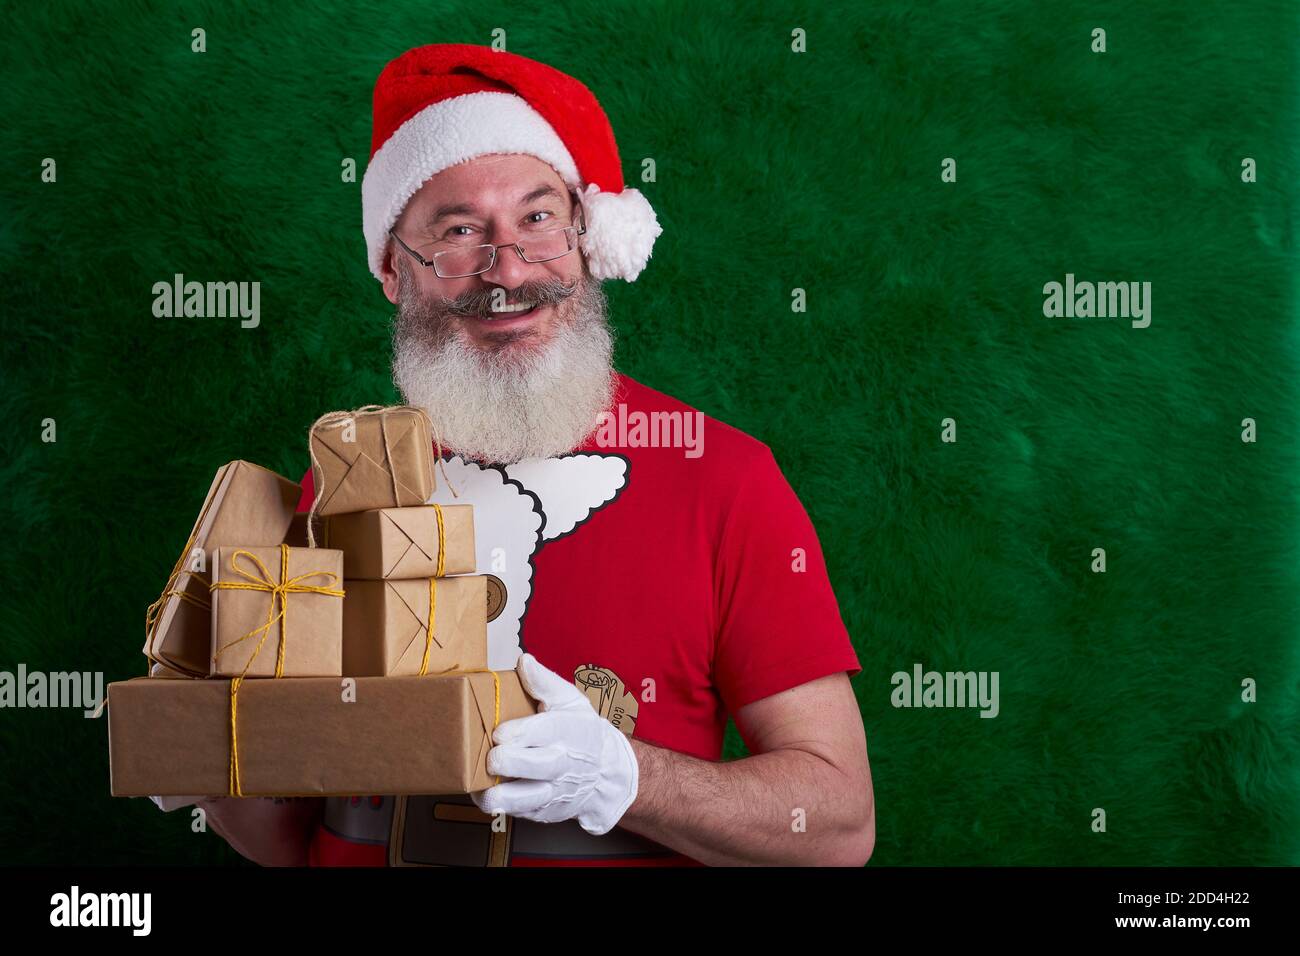 Mature bearded man wearing Santa hat with many gifts in hand, Santa smiling and looking at camera, copy space Stock Photo